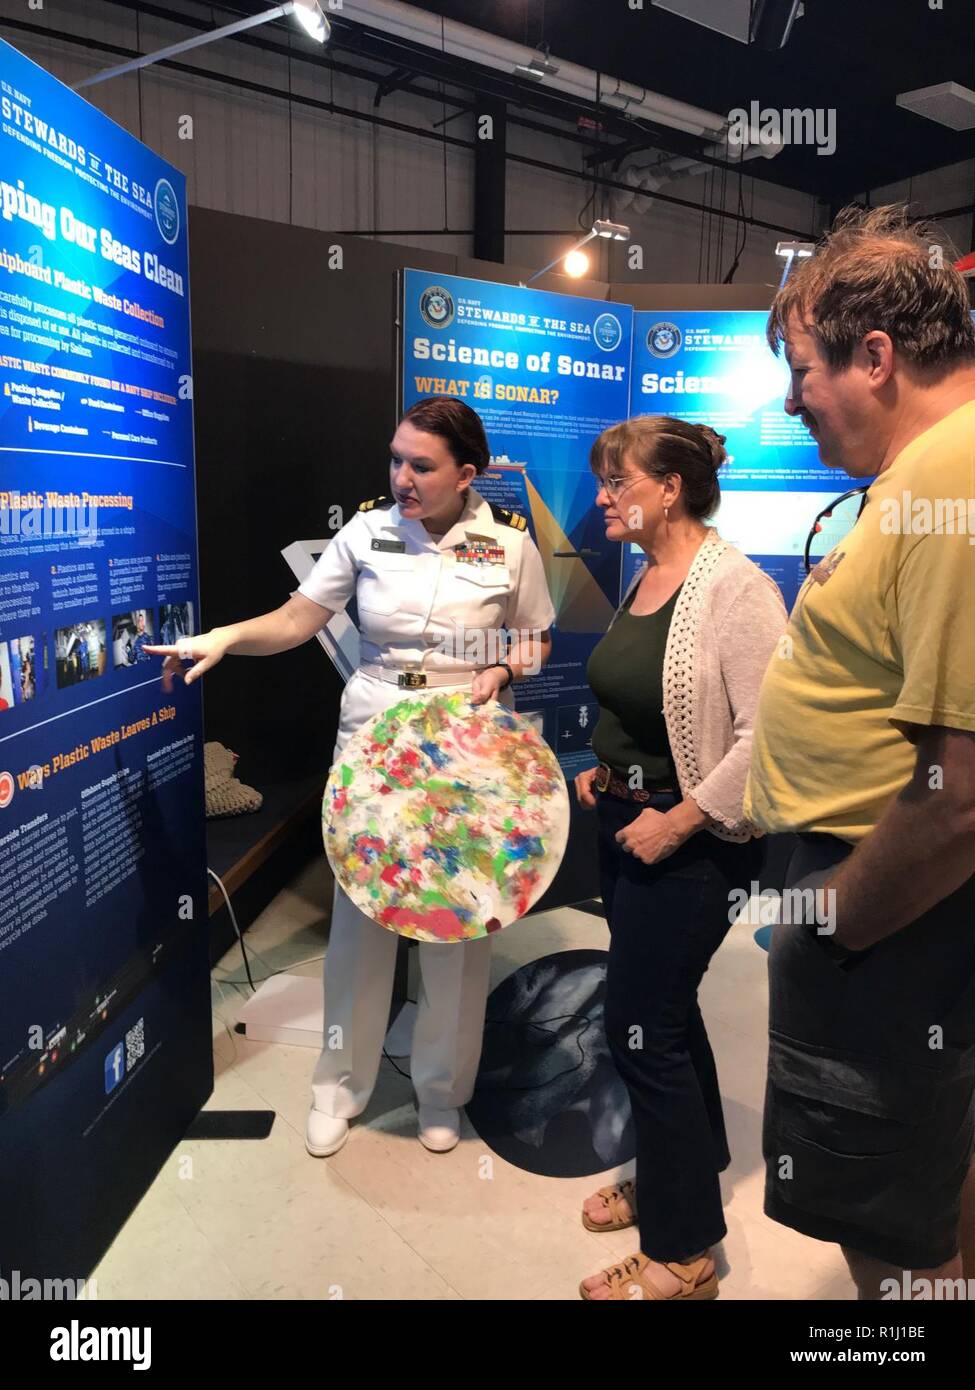 WALLOPS ISLAND, Va. (Sept. 22, 2018) Lt. Jill Brown, a public affairs officer attached to U.S. Fleet Forces Command, explains shipboard plastic waste processing to visitors at the U.S. Navy’s “Stewards of the Sea: Defending Freedom, Protecting the Environment” exhibit during the NASA 60th anniversary celebration held at the NASA Wallops Flight Facility Visitor Center. The Navy employs every means available to mitigate the potential environmental effects of our activities without jeopardizing the safety of our Sailors or impacting our Navy readiness mission. Stock Photo